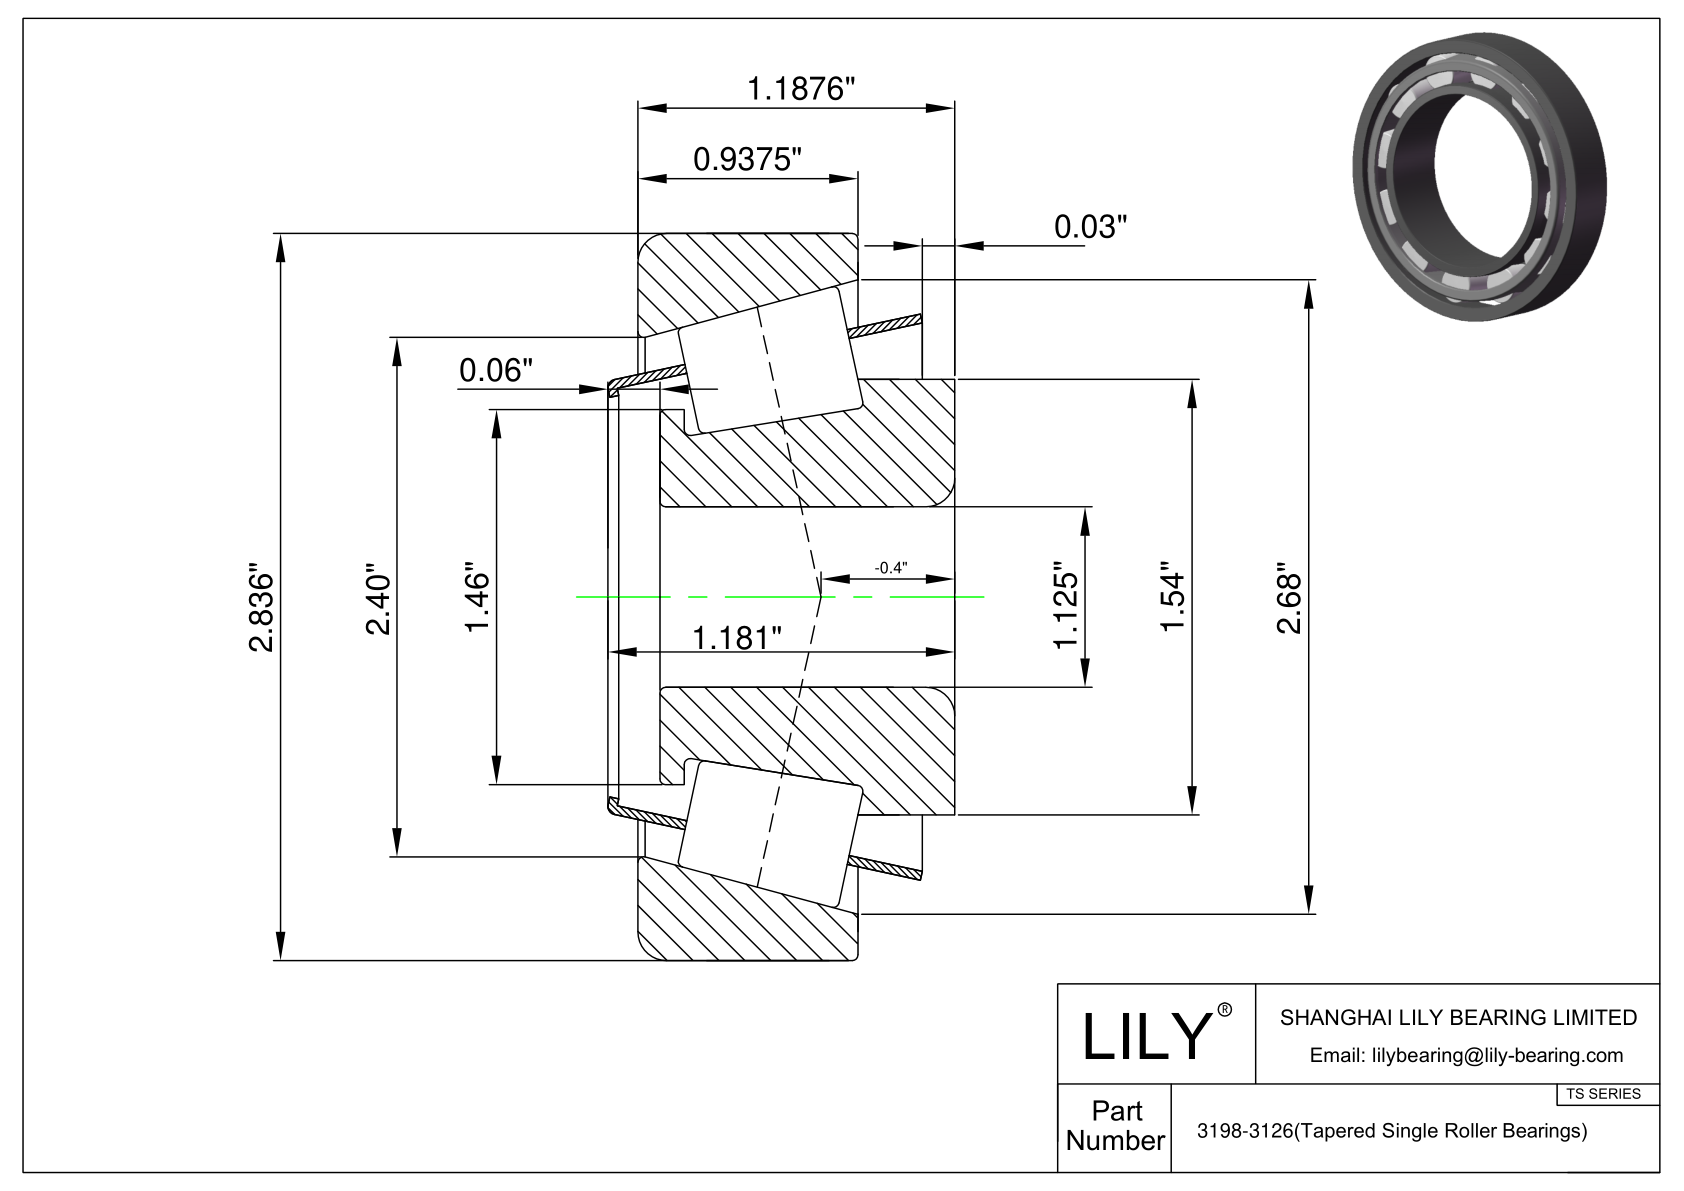 3198-3126 TS (Tapered Single Roller Bearings) (Imperial) cad drawing